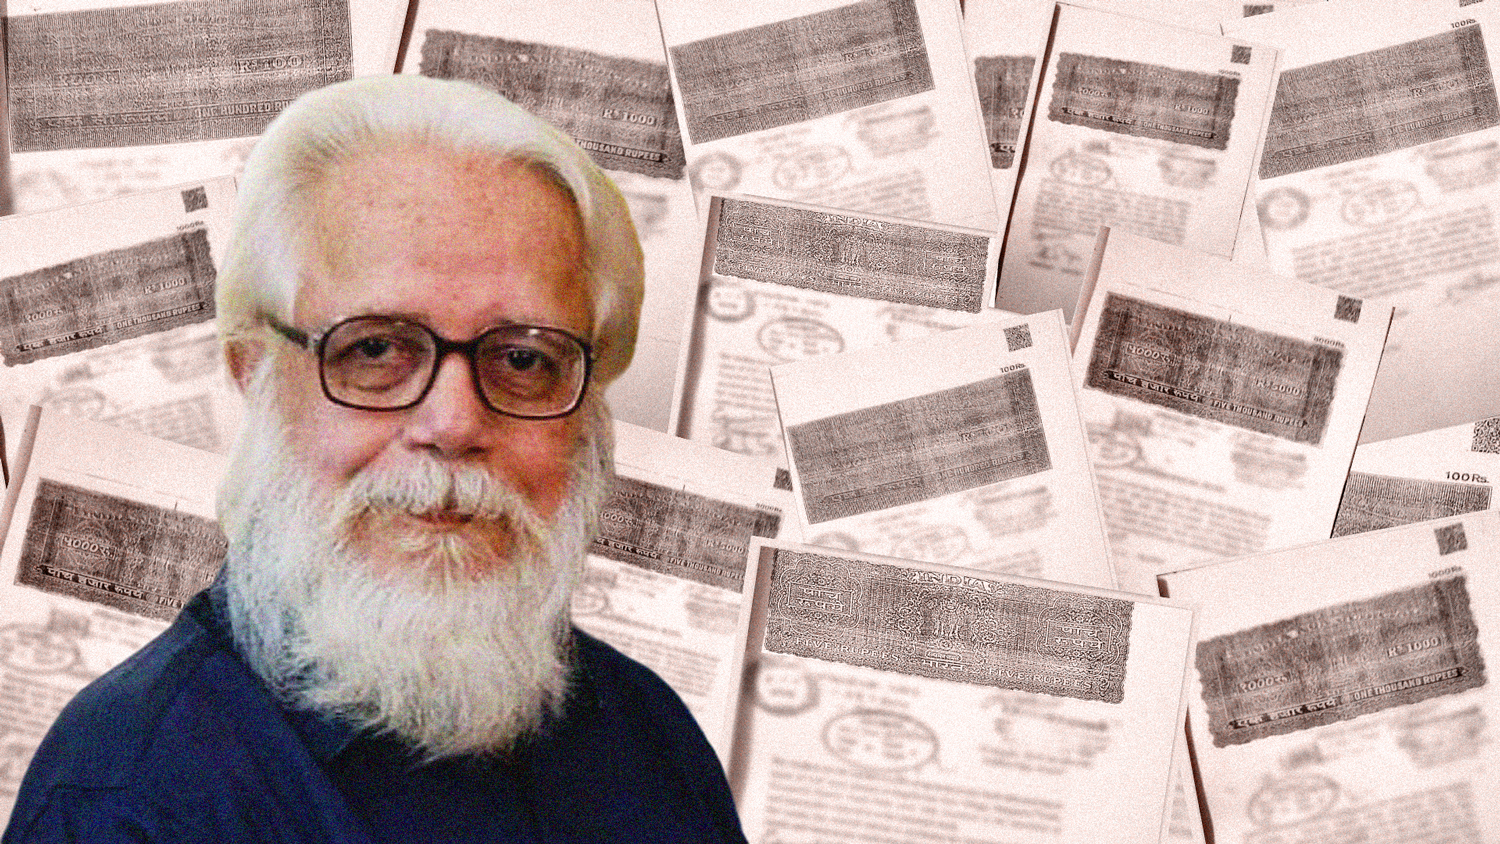  Petition relating to ISRO case alleges “suspicious” land deals between Nambi Narayanan and ex CBI officials